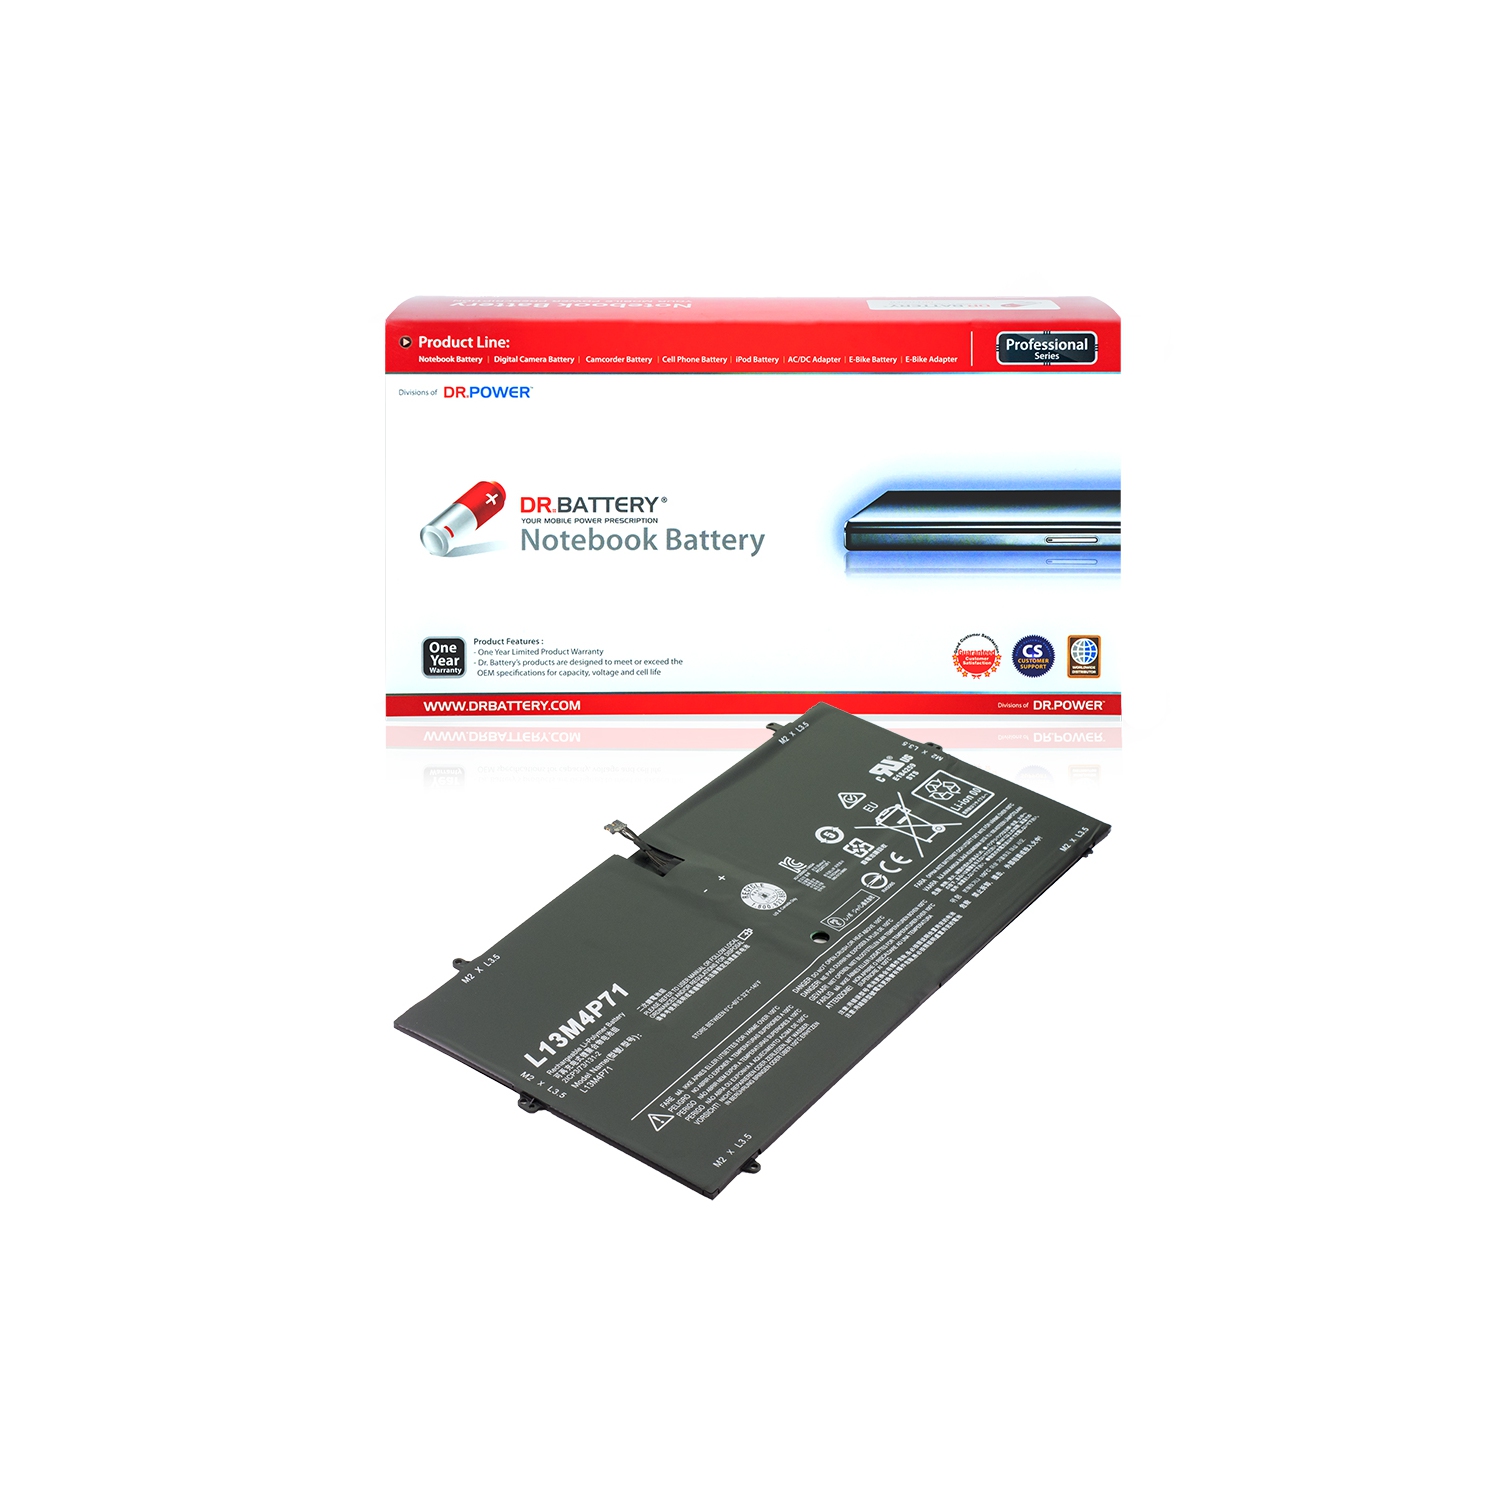 DR. BATTERY - Replacement for Lenovo Yoga 3 Pro 80HE010HUS / 80HE010JUS / 80HE010KUS / 80HE010NCF / L13M4P71 / L14S4P71